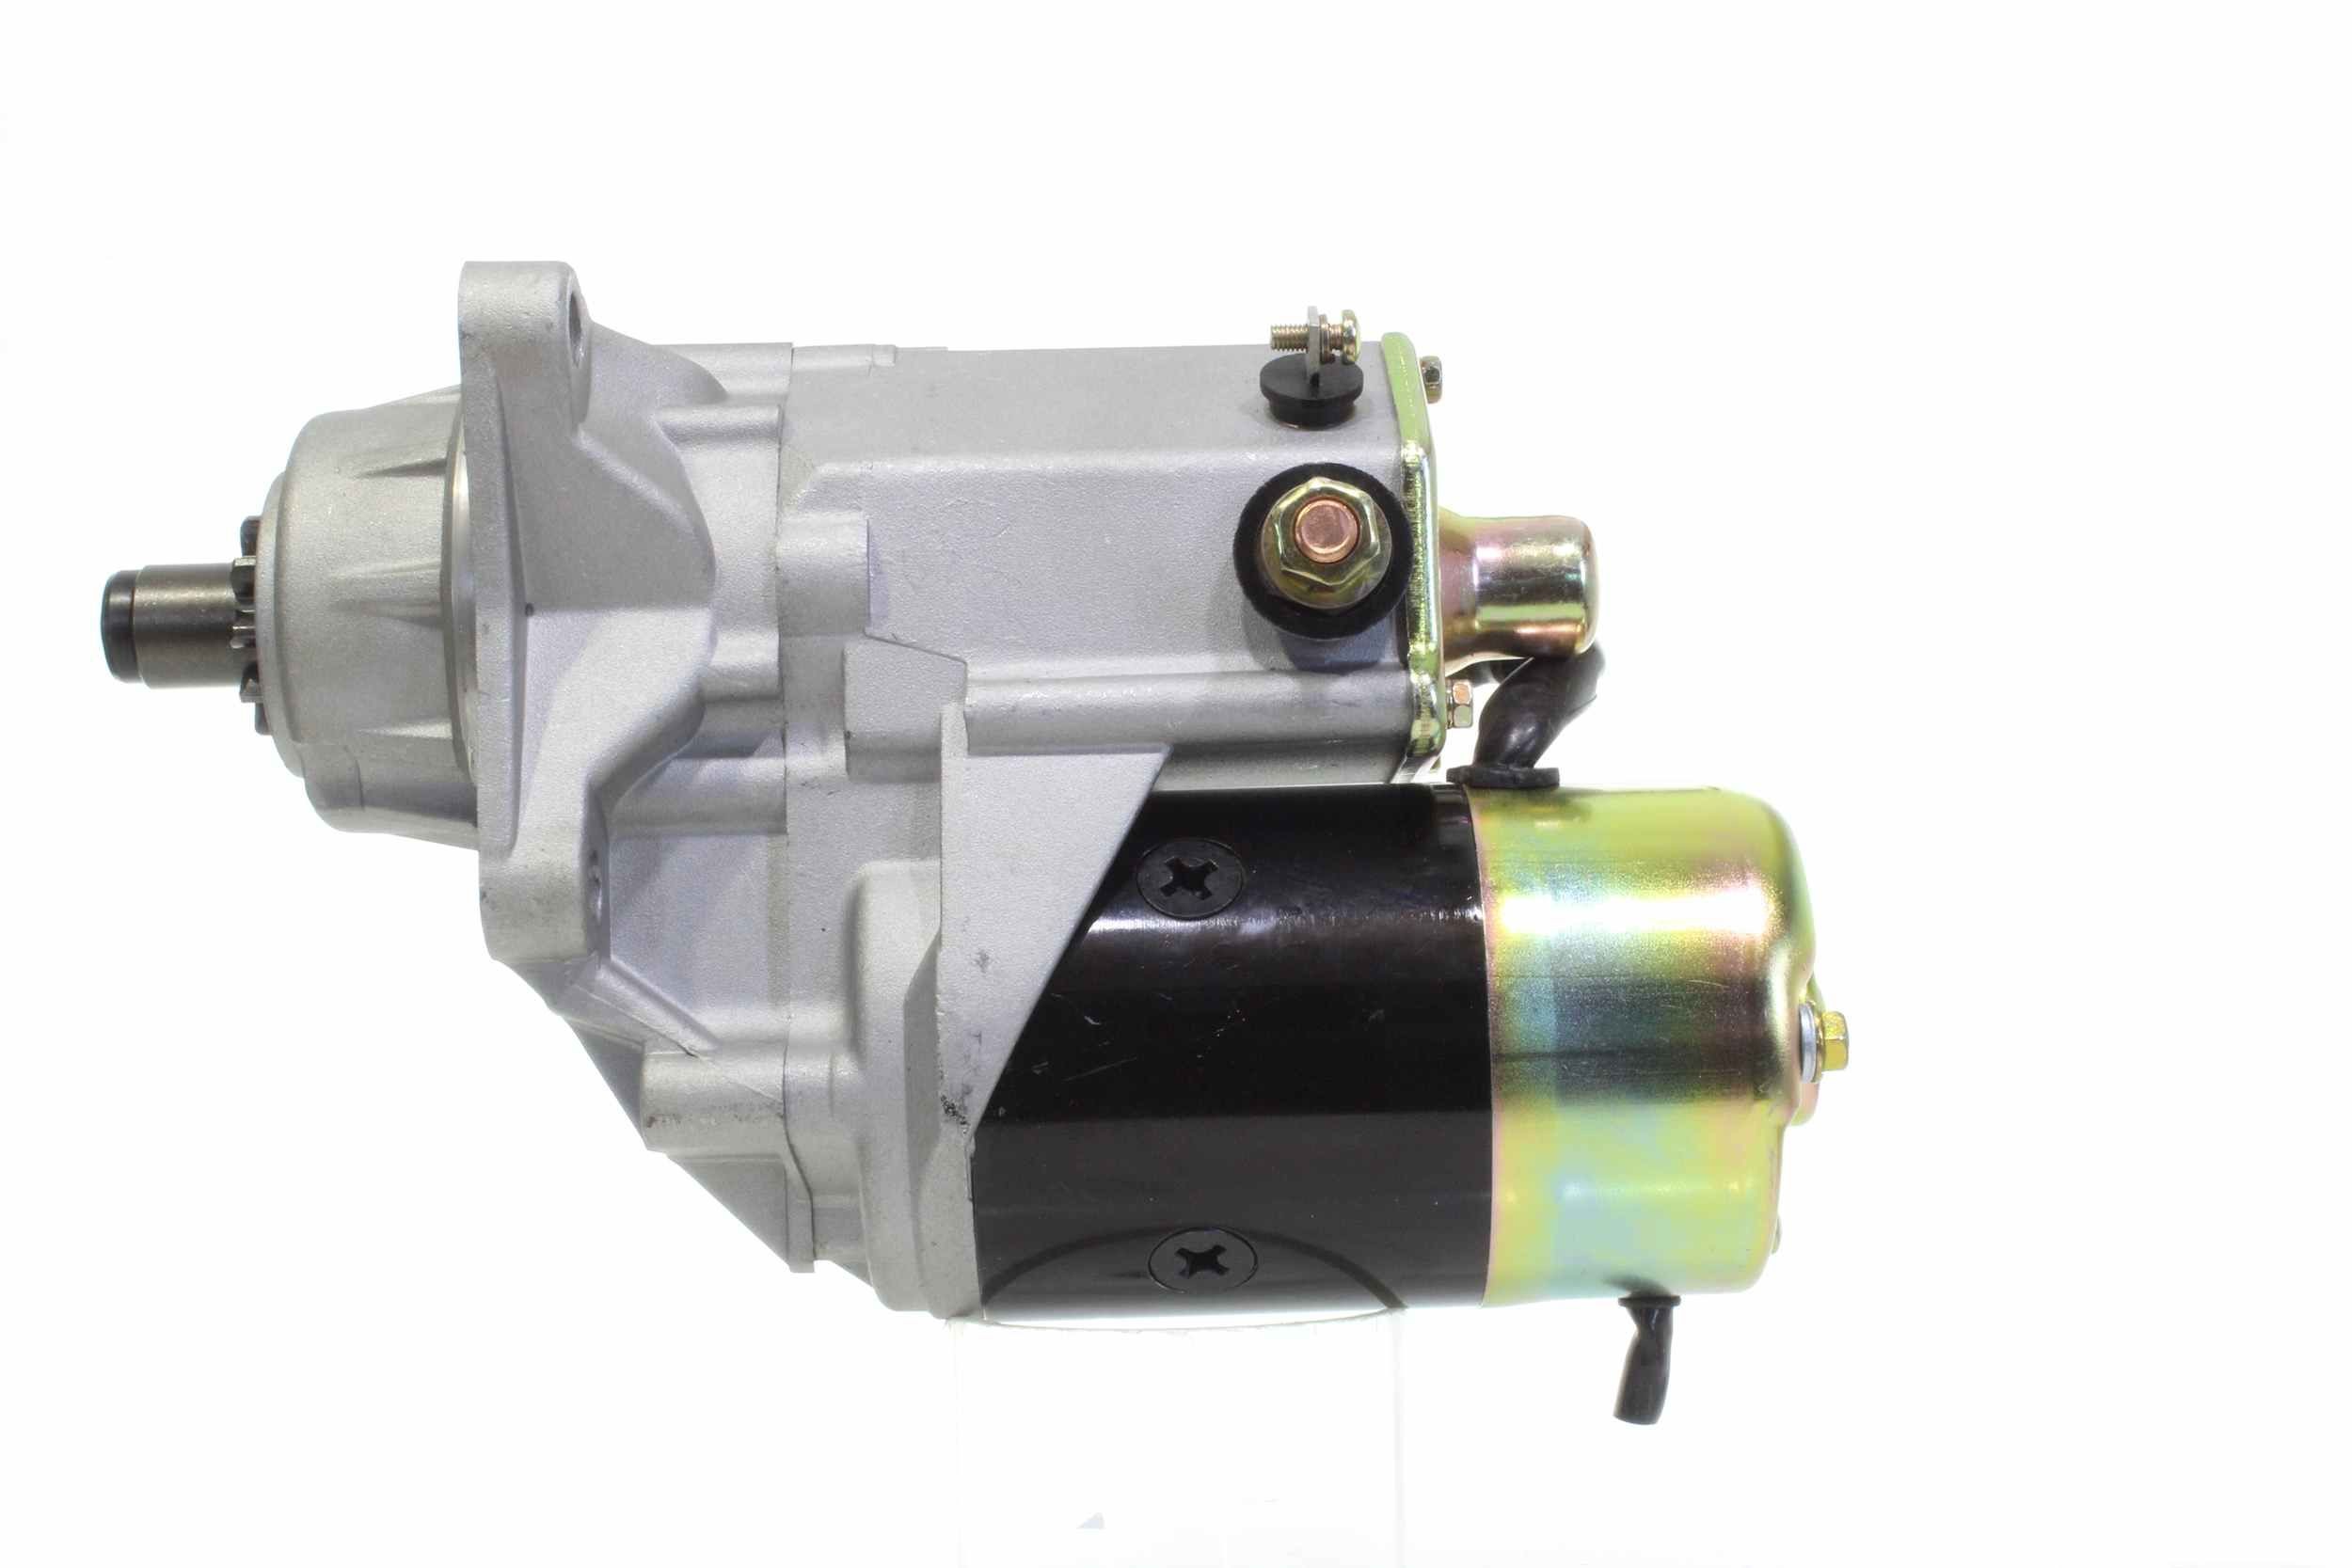 10440341 Engine starter motor ALANKO 17399 review and test